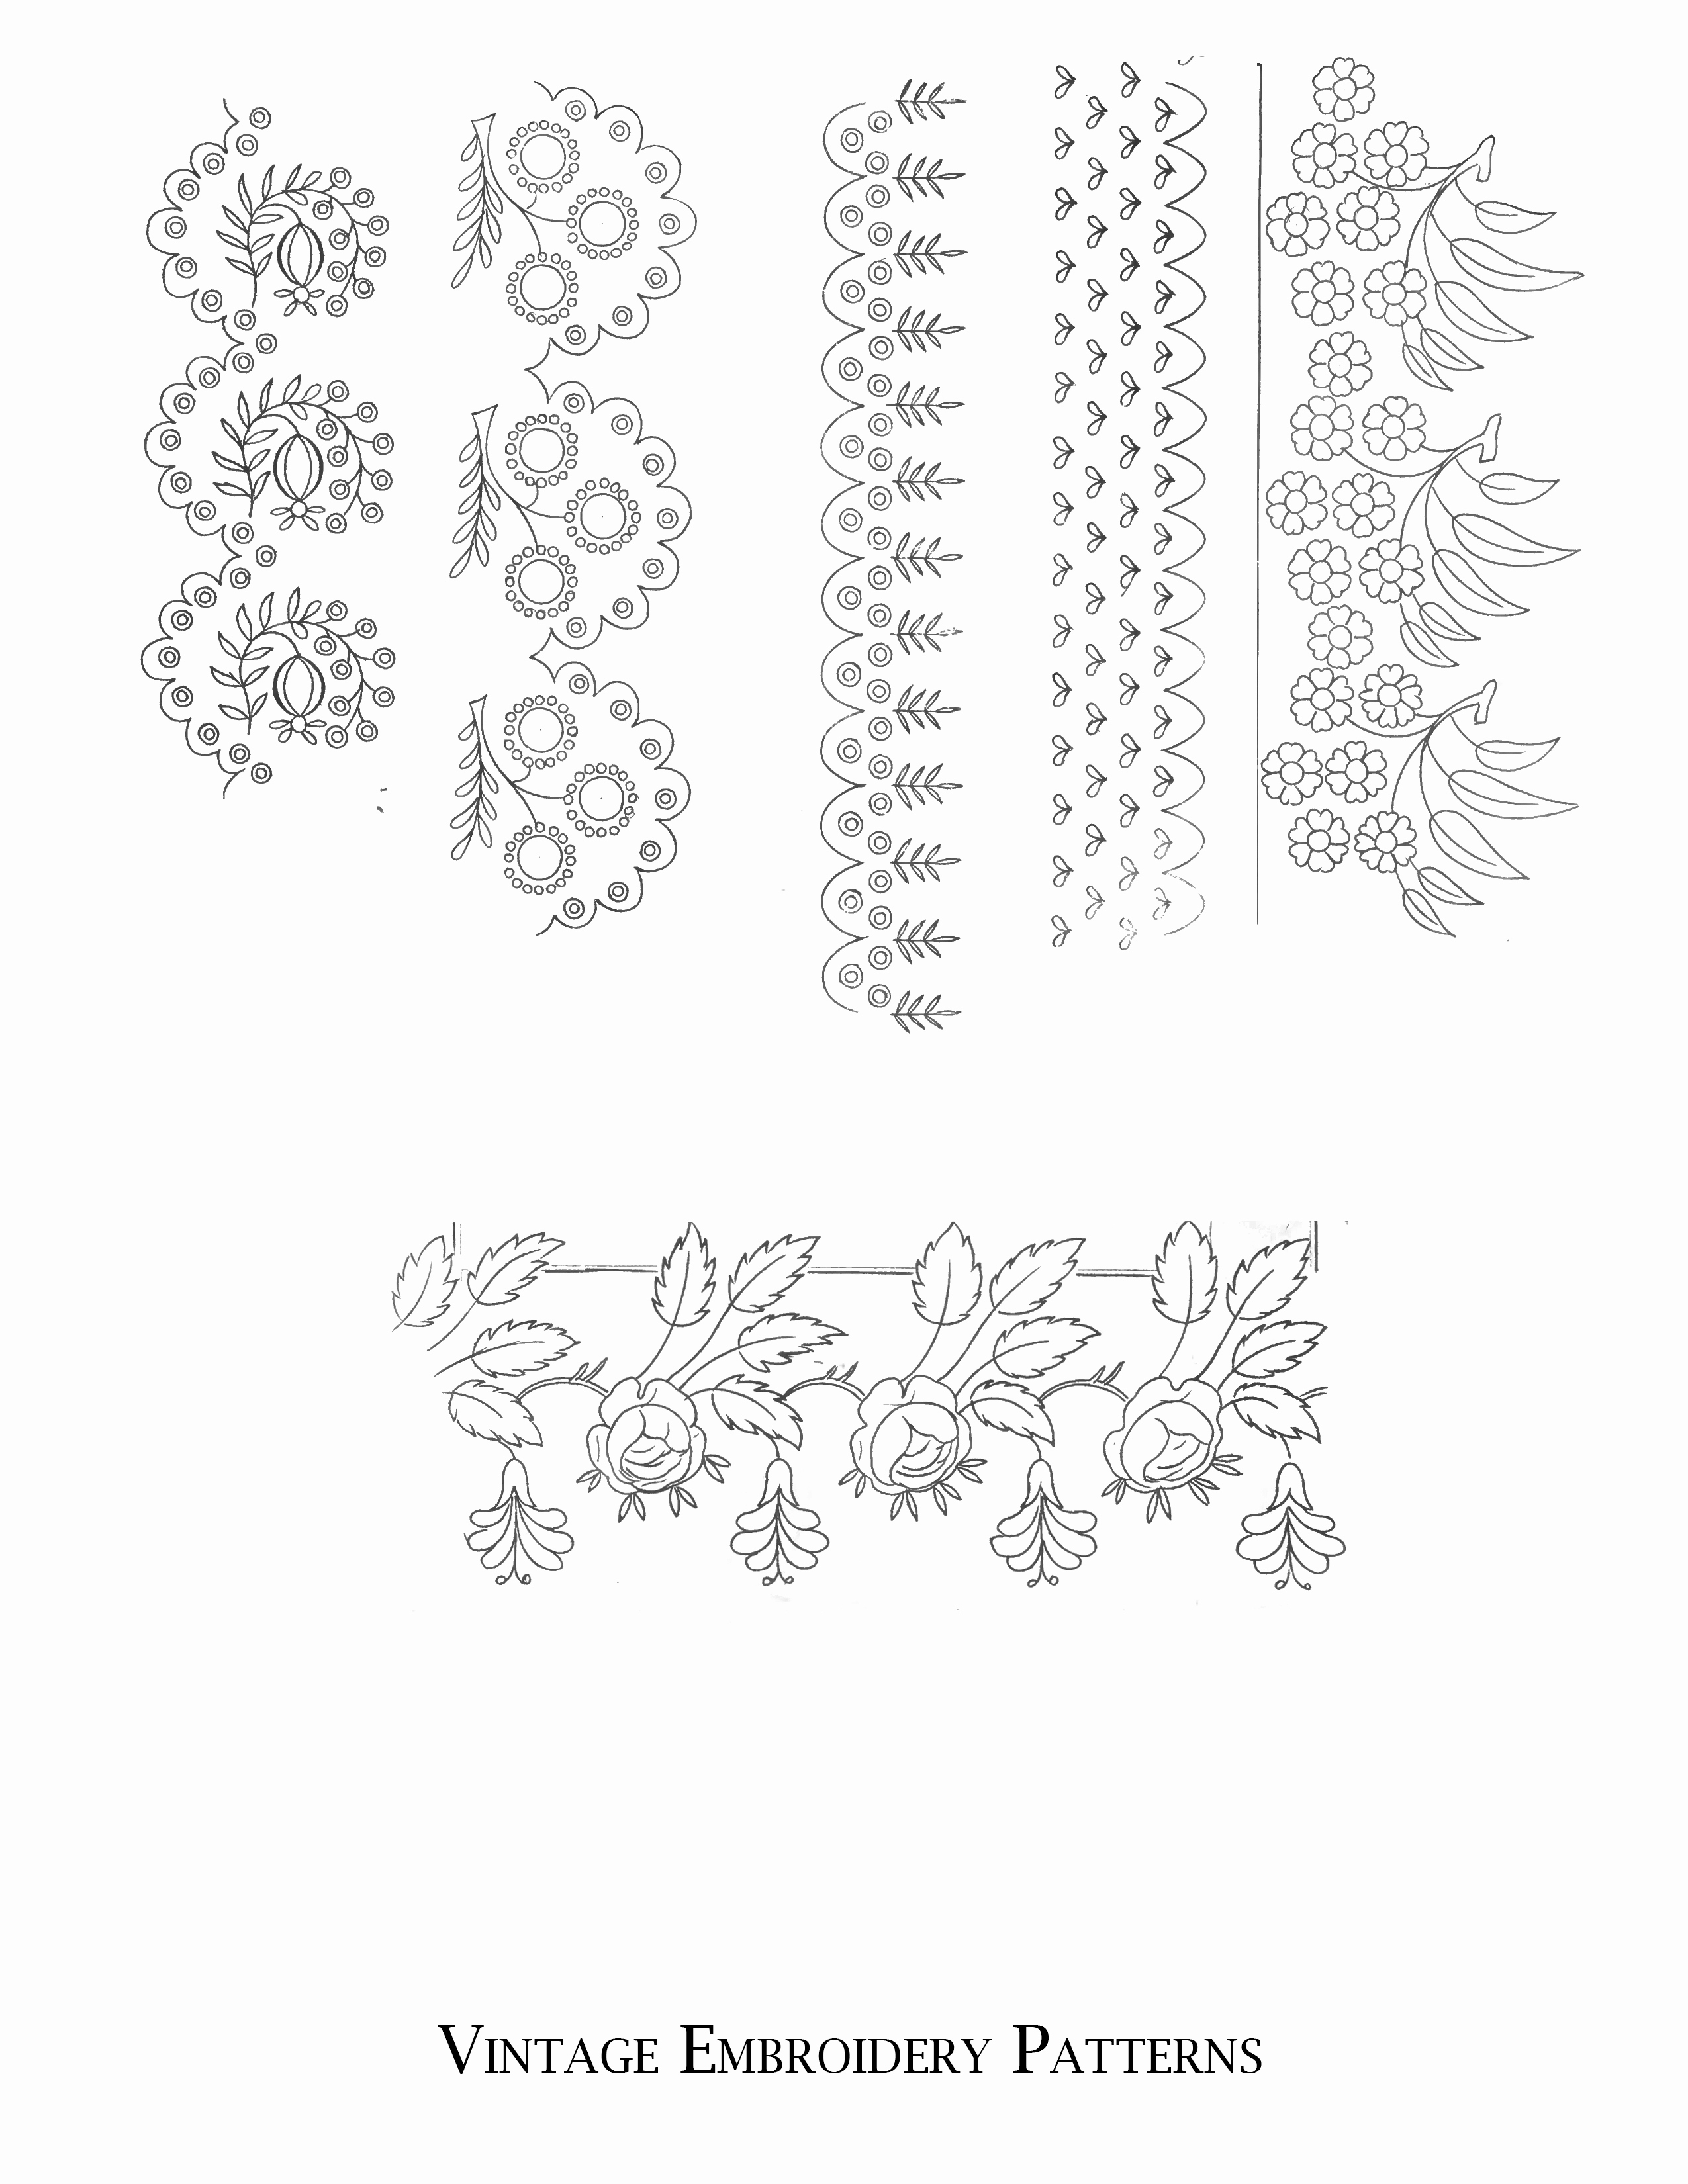 Vintage Hand Embroidery Patterns Free Printable Embroidery Patterns Unique Vintage Archives Page 22